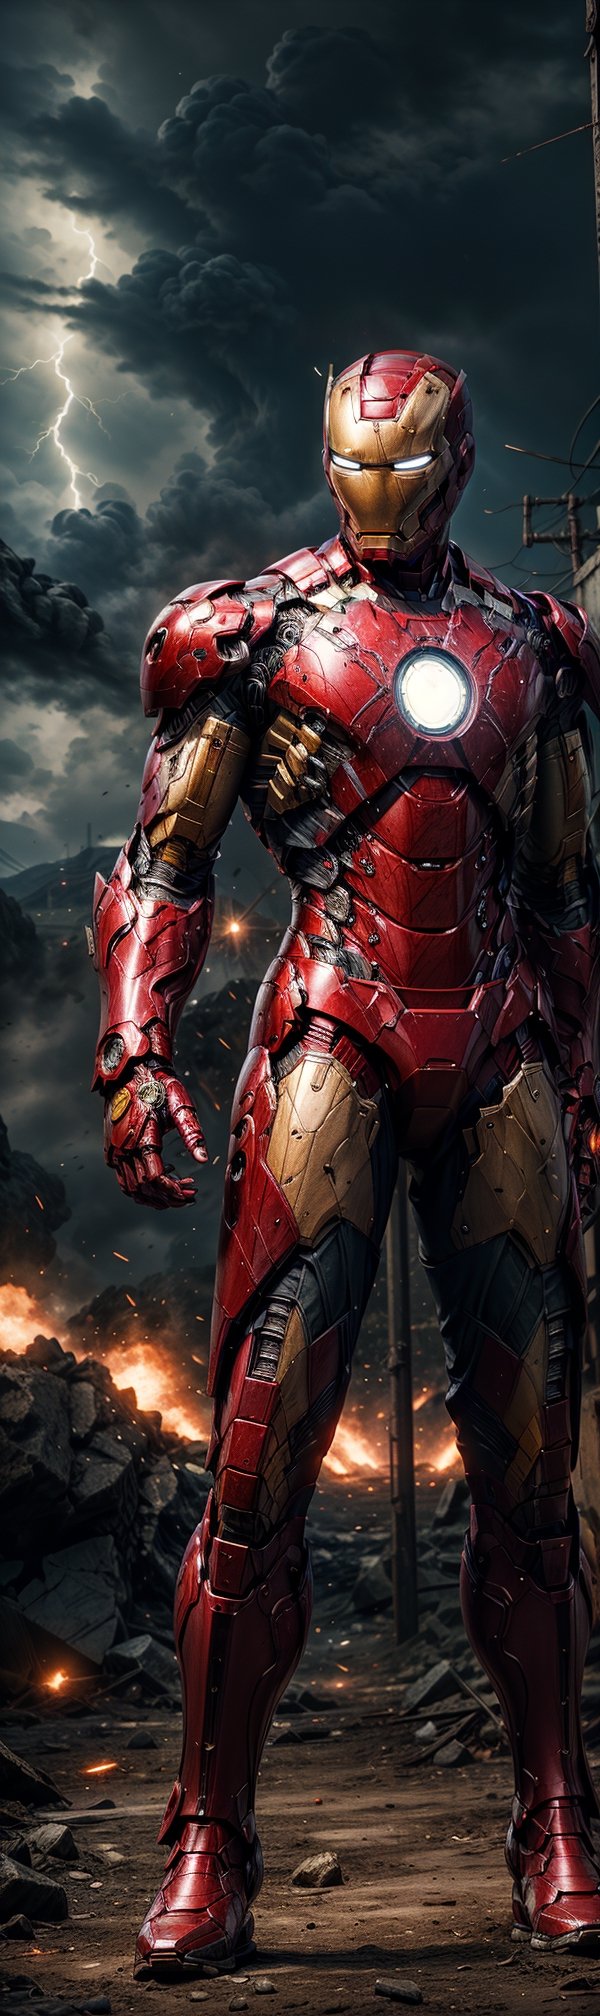  a super high-detailed and realistic image of a cyberpunk-style knight in a iron-man-inspired body armor with a glowing lightning charge:

"Generate an extraordinary and highly detailed image of a cyberpunk-style knight donning a state-of-the-art silver-blue body armor that draws inspiration from Iron-Man, yet takes it to a new level of high-tech brilliance. This knightly body armor emits a mesmerizing glow, with lightning charges coursing through its surface, showcasing its incredible technological sophistication.

The knight's powerful physique is accentuated by the hi-tech armor, and his body suit incorporates an array of advanced tools and gadgets, all seamlessly integrated. He wears a Hi-Tech helmet, both concealing his identity and offering crucial data through its heads-up display.

In this stunning image, the knight is adorned in the full glory of his Hi-Tech lightning charge magical armor, a perfect blend of technology and mystic power. The background should portray a knightly setting, heightening the sense of grandeur and heroism.

With a heroic and dynamic pose, this image should encapsulate the knight's unwavering courage and determination. Every detail, from the intricate spider-like designs on the armor to the crackling energy of the lightning charge, should be meticulously rendered, creating a 4K HDR super high-quality masterpiece that immerses viewers in the thrilling world of this cyberpunk knight." ((Photographic cinematic super high detailed super realistic warrior Iron man knight image)), ((4k HDR super high quality image)), ((masterpiece)), (((full body))),EpicSky